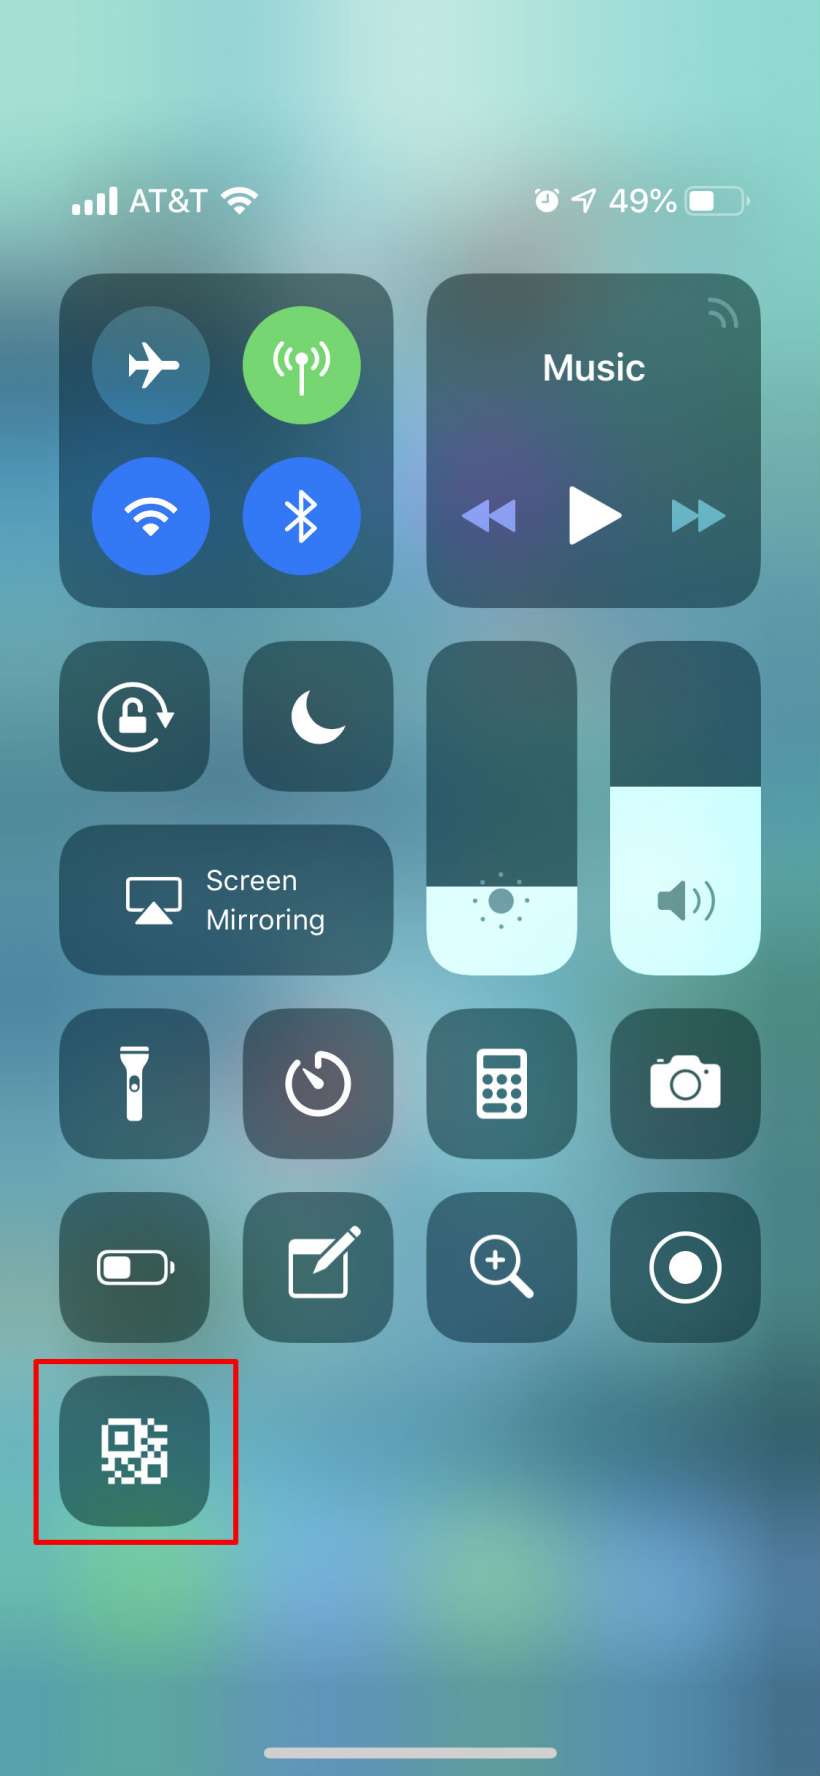 How to add QR scanner to Control Center on iPhone and iPad in iOS 12.